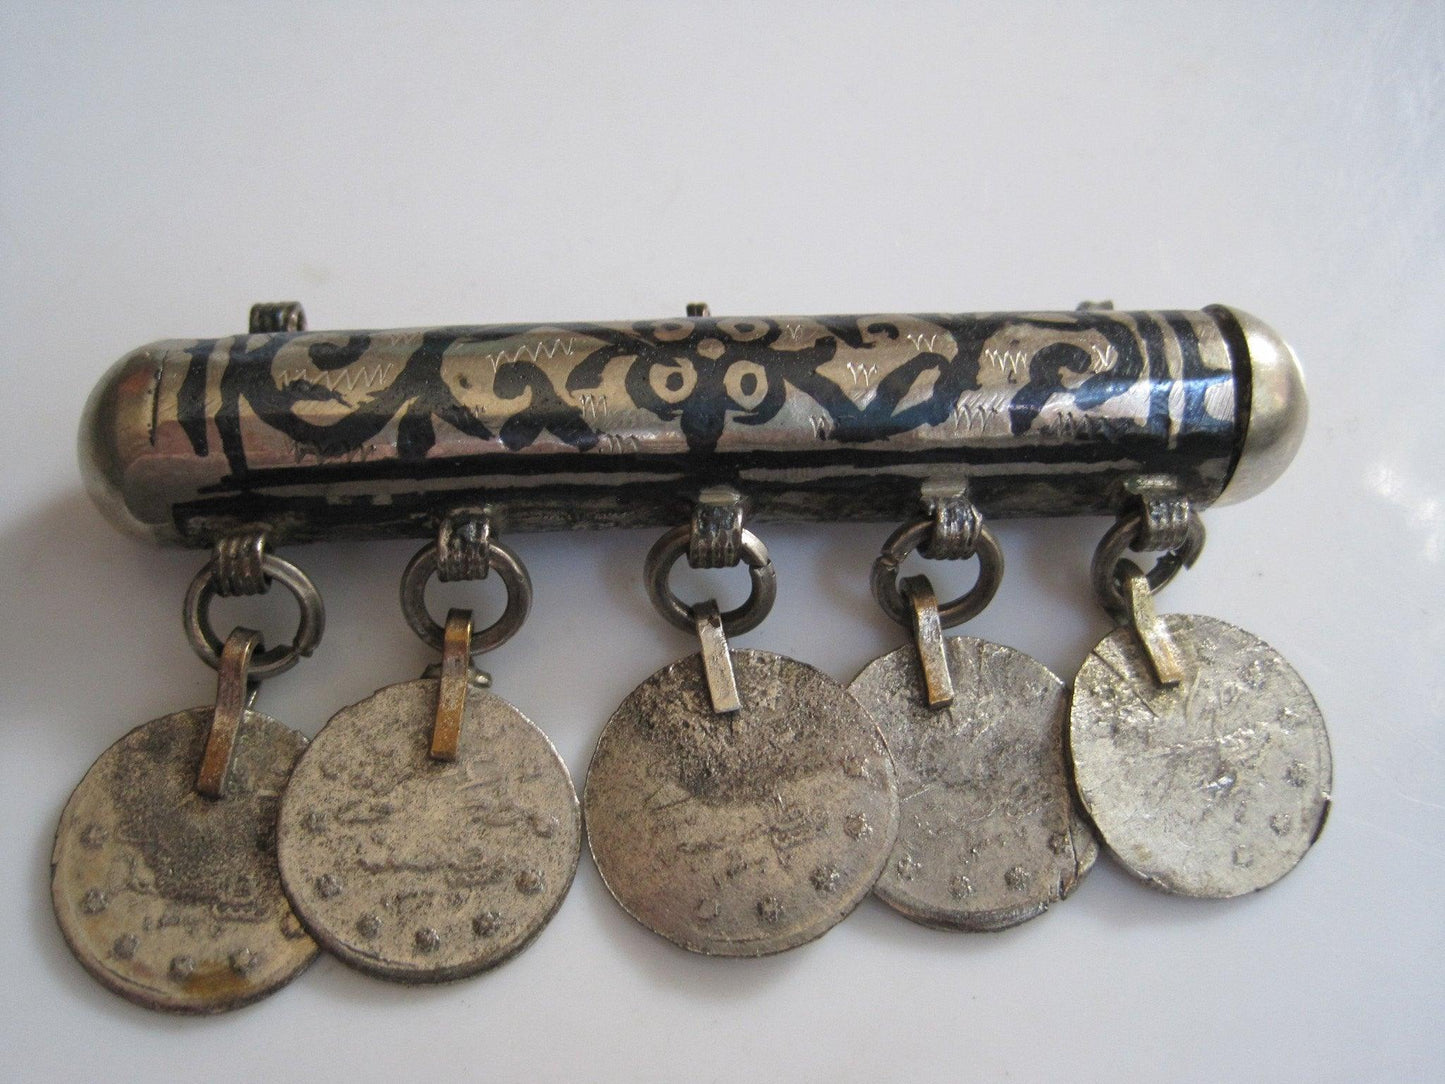 Antique Ottoman Silver and Niello Amulet Holder with Silver Coins - Anteeka